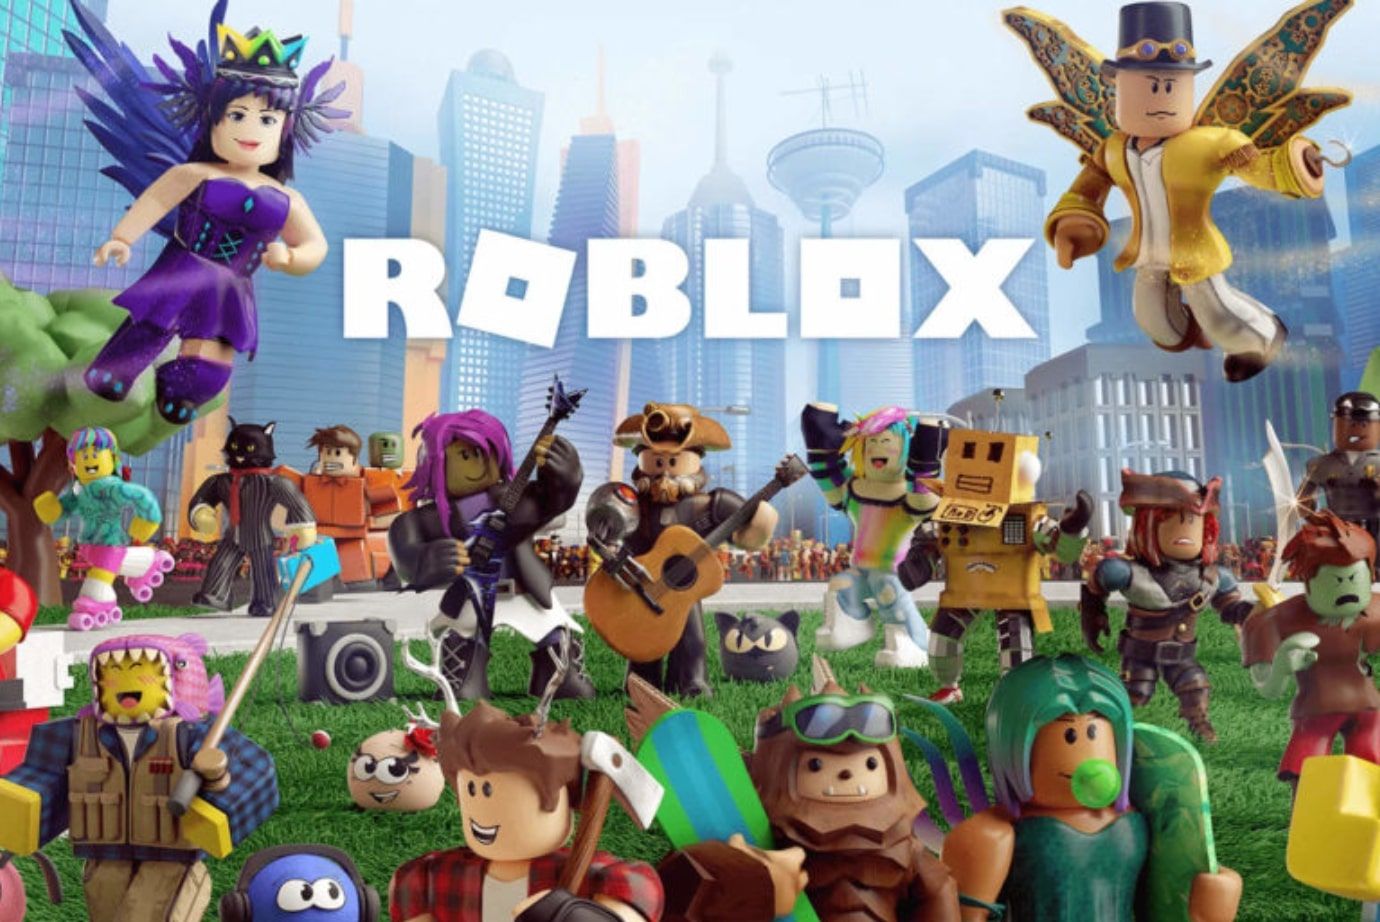 Roblox September 2020 Promo Codes New Cosmetics All Active Codes Backpacks Crystalline Companion More - 1x1x1x1x1x1 roblox all working roblox promo codes 2019 september